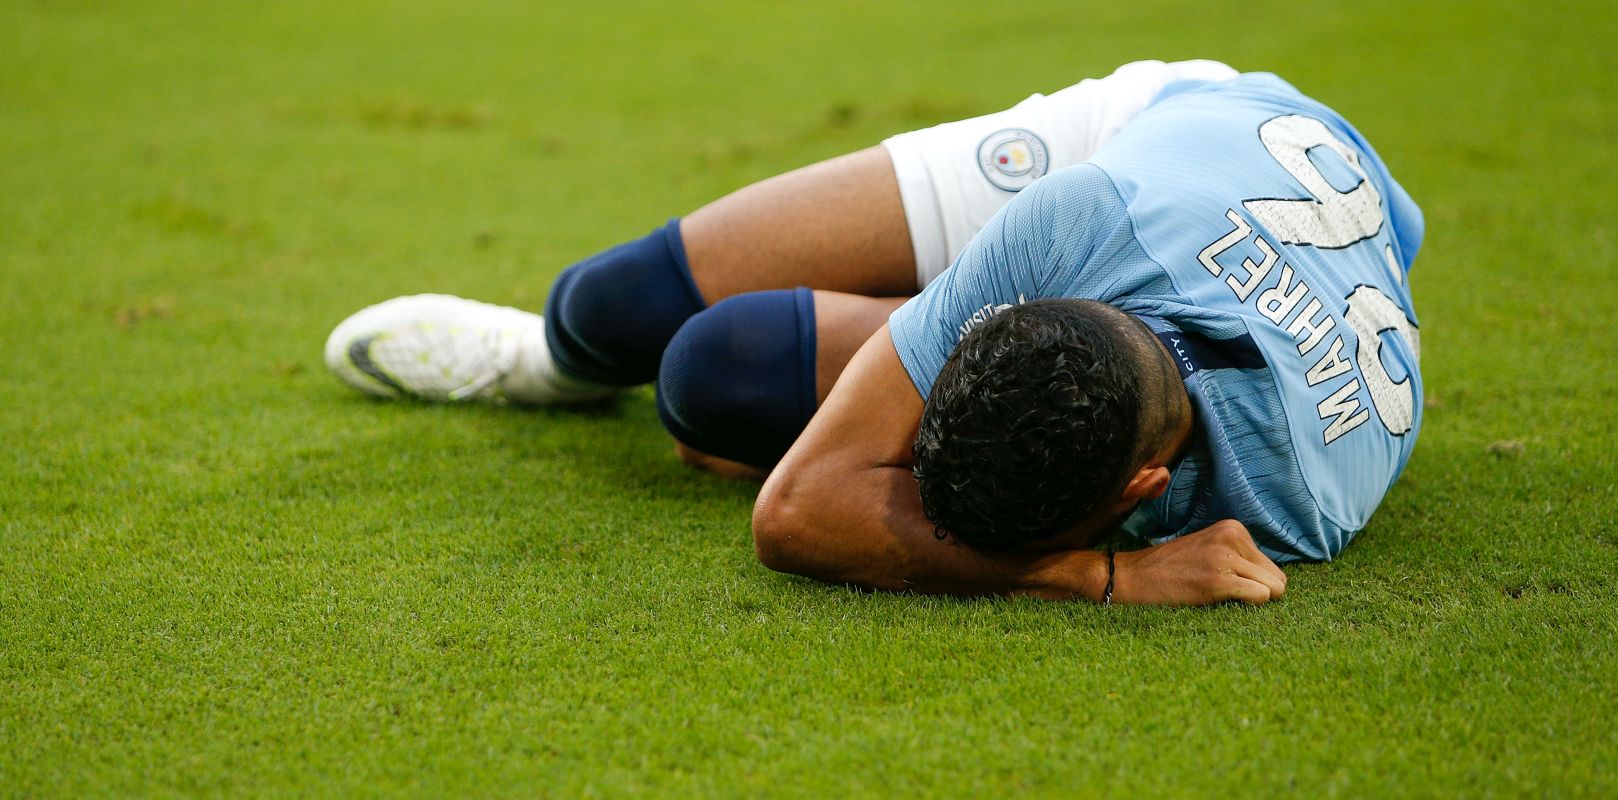 MIAMI, FL - JULY 28:  Riyad Mahrez #26 of Manchester City reacts after being injured against Bayern Munich during the first half of the International Champions Cup at Hard Rock Stadium on July 28, 2018 in Miami, Florida.  (Photo by Michael Reaves/Getty Images)